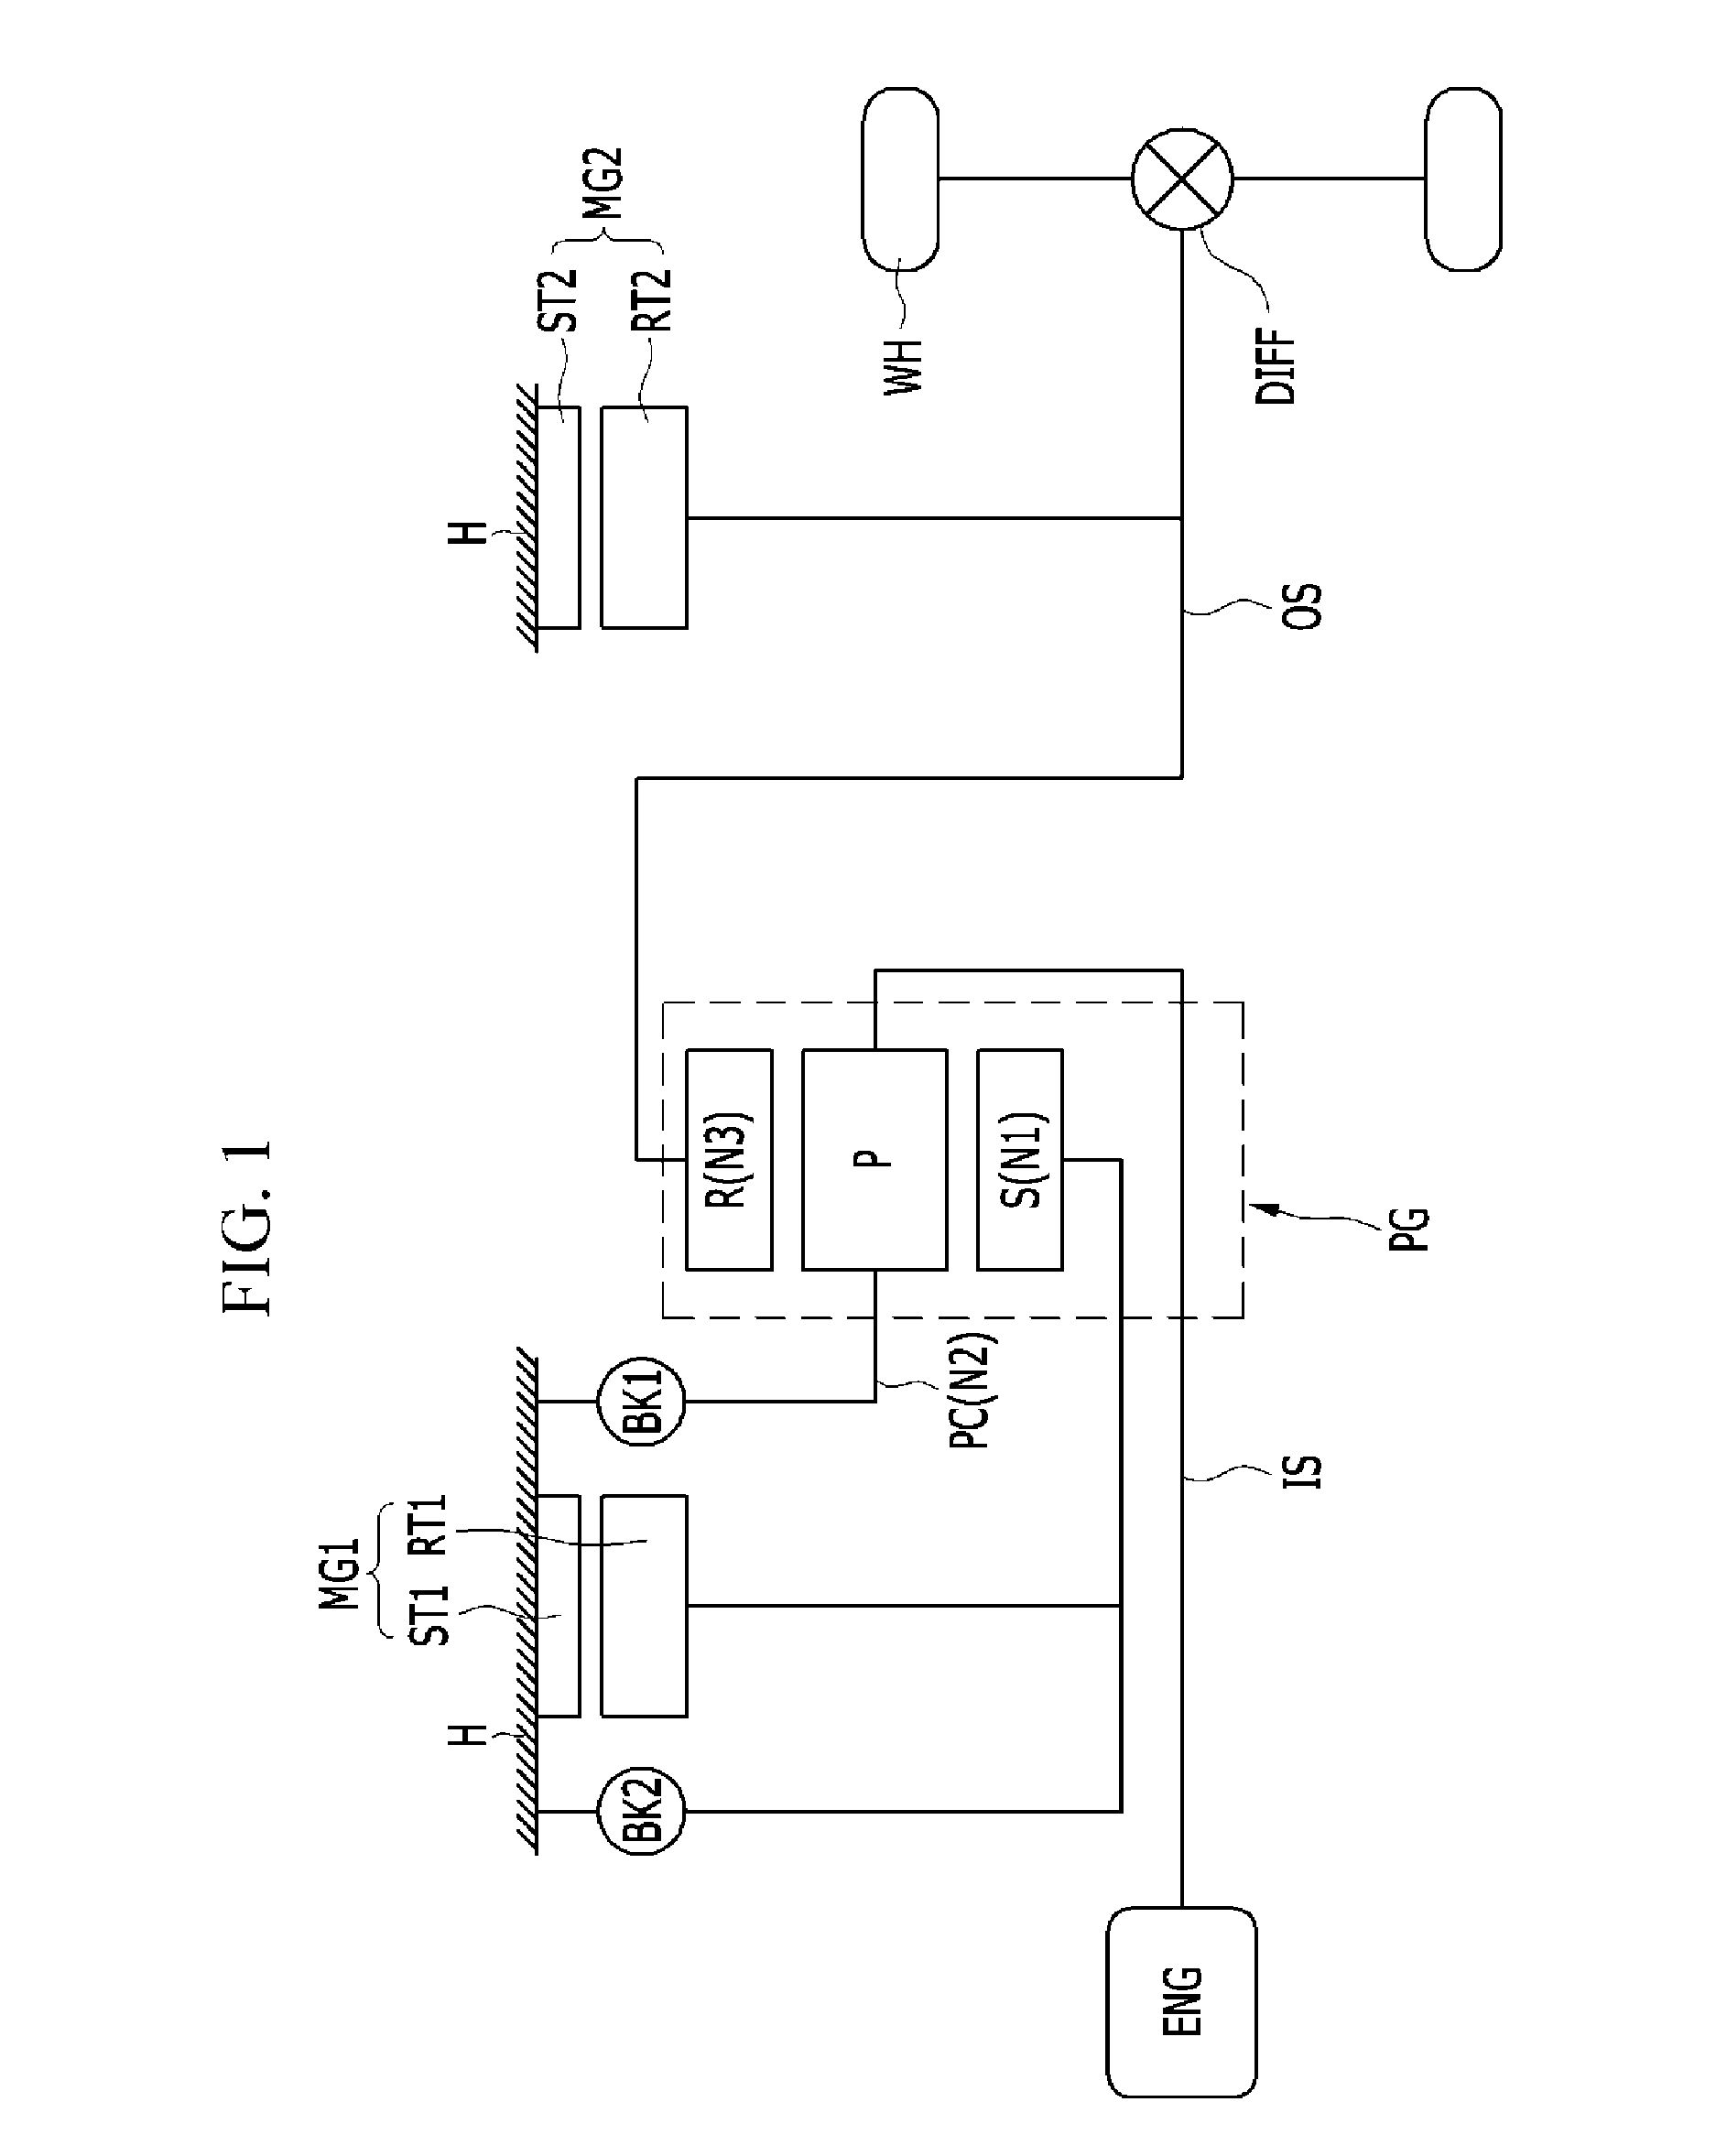 Power transmission system of hybrid electric vehicle